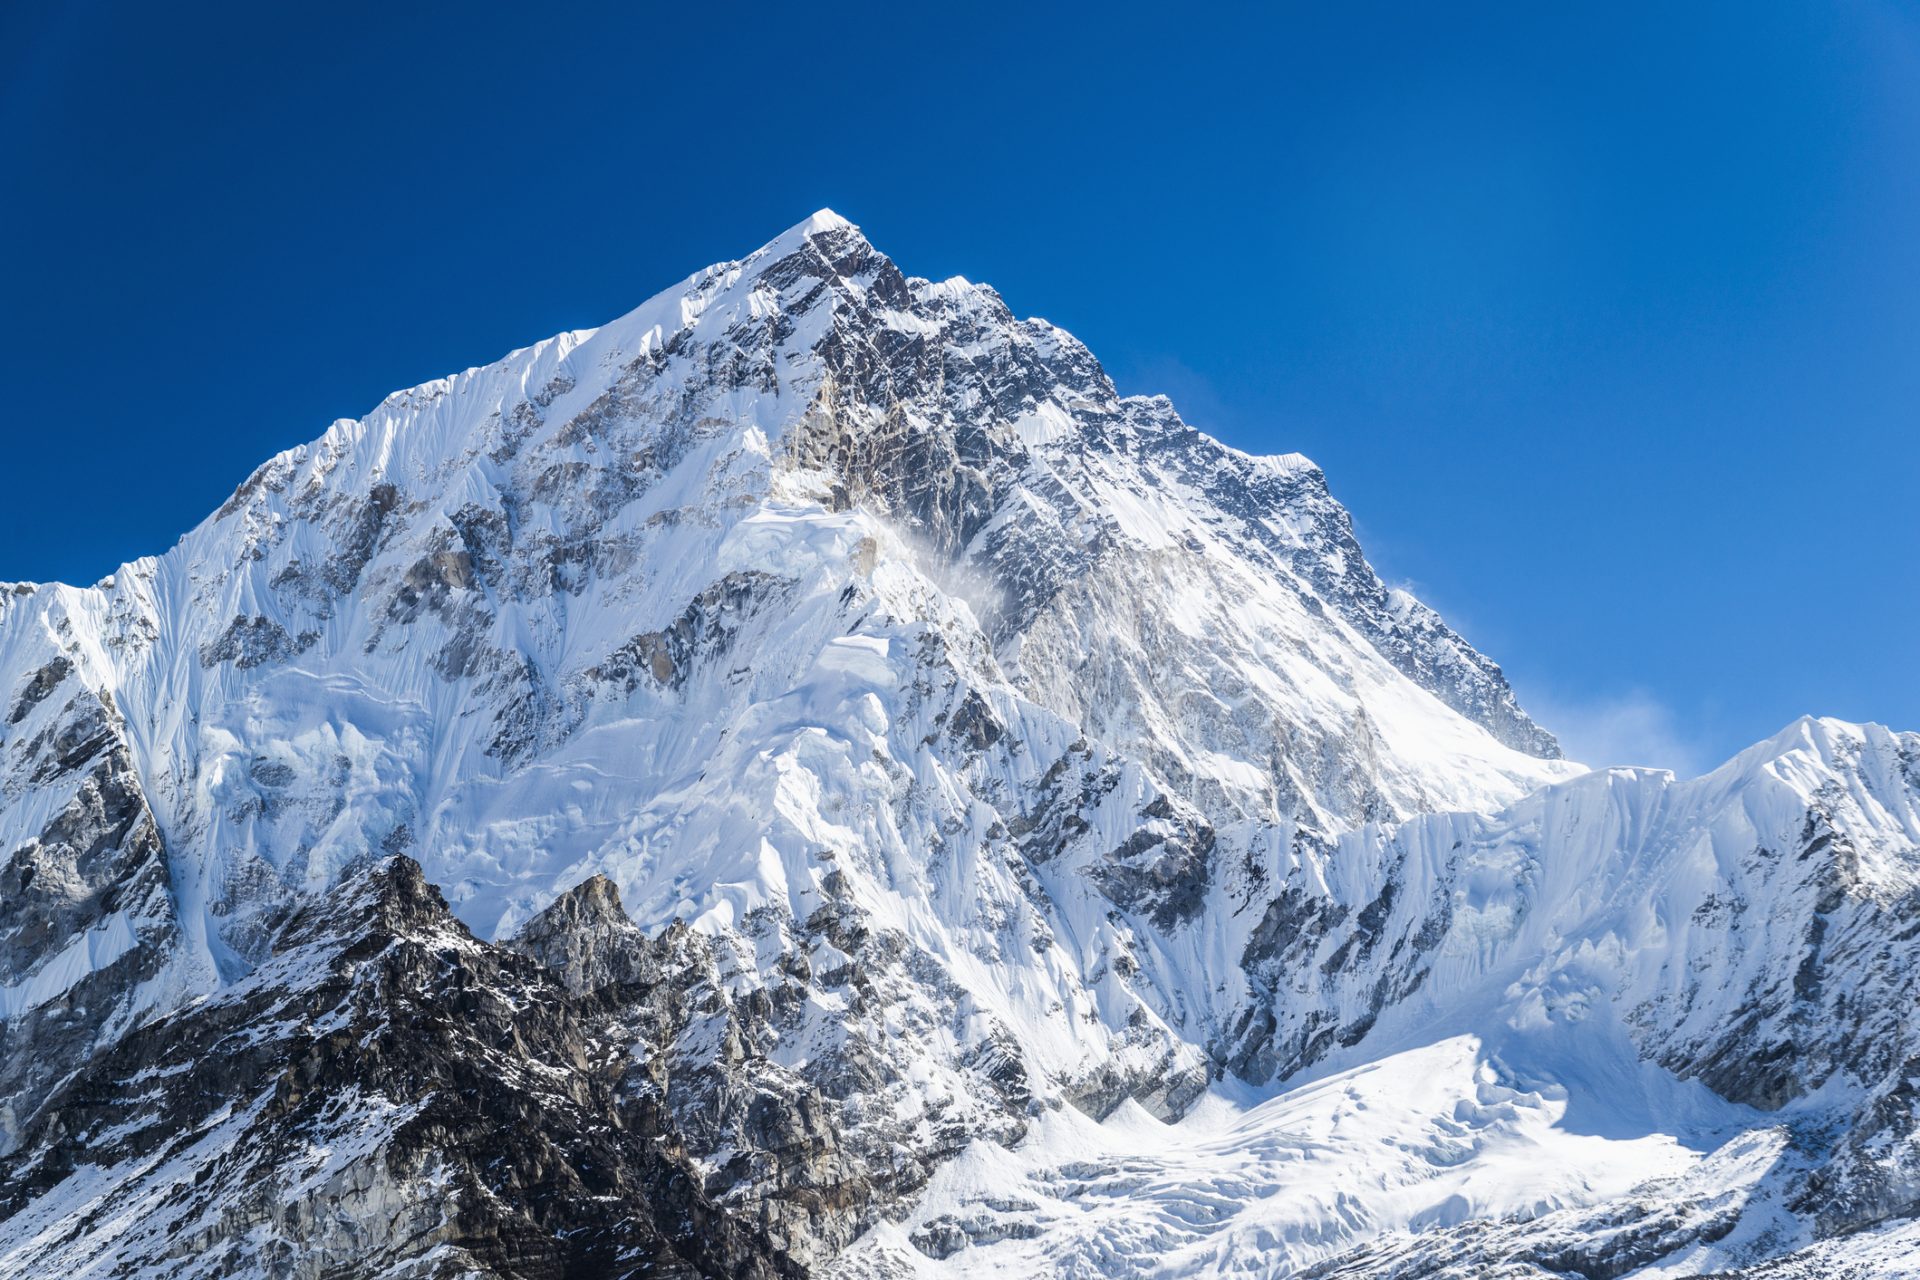 Is Mount Everest really the tallest mountain?